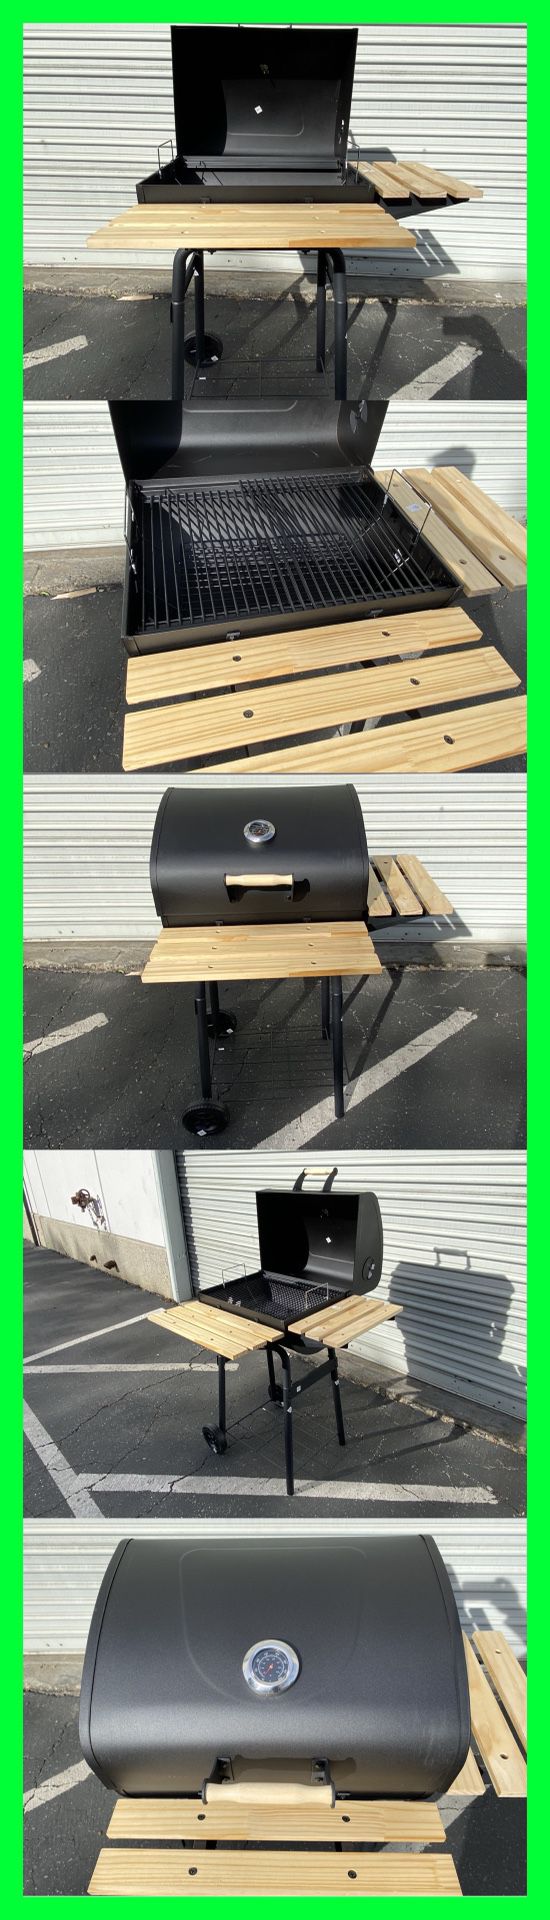 Charcoal Barbeque Grill BBQ Smoker 12” x 18” | 12x18